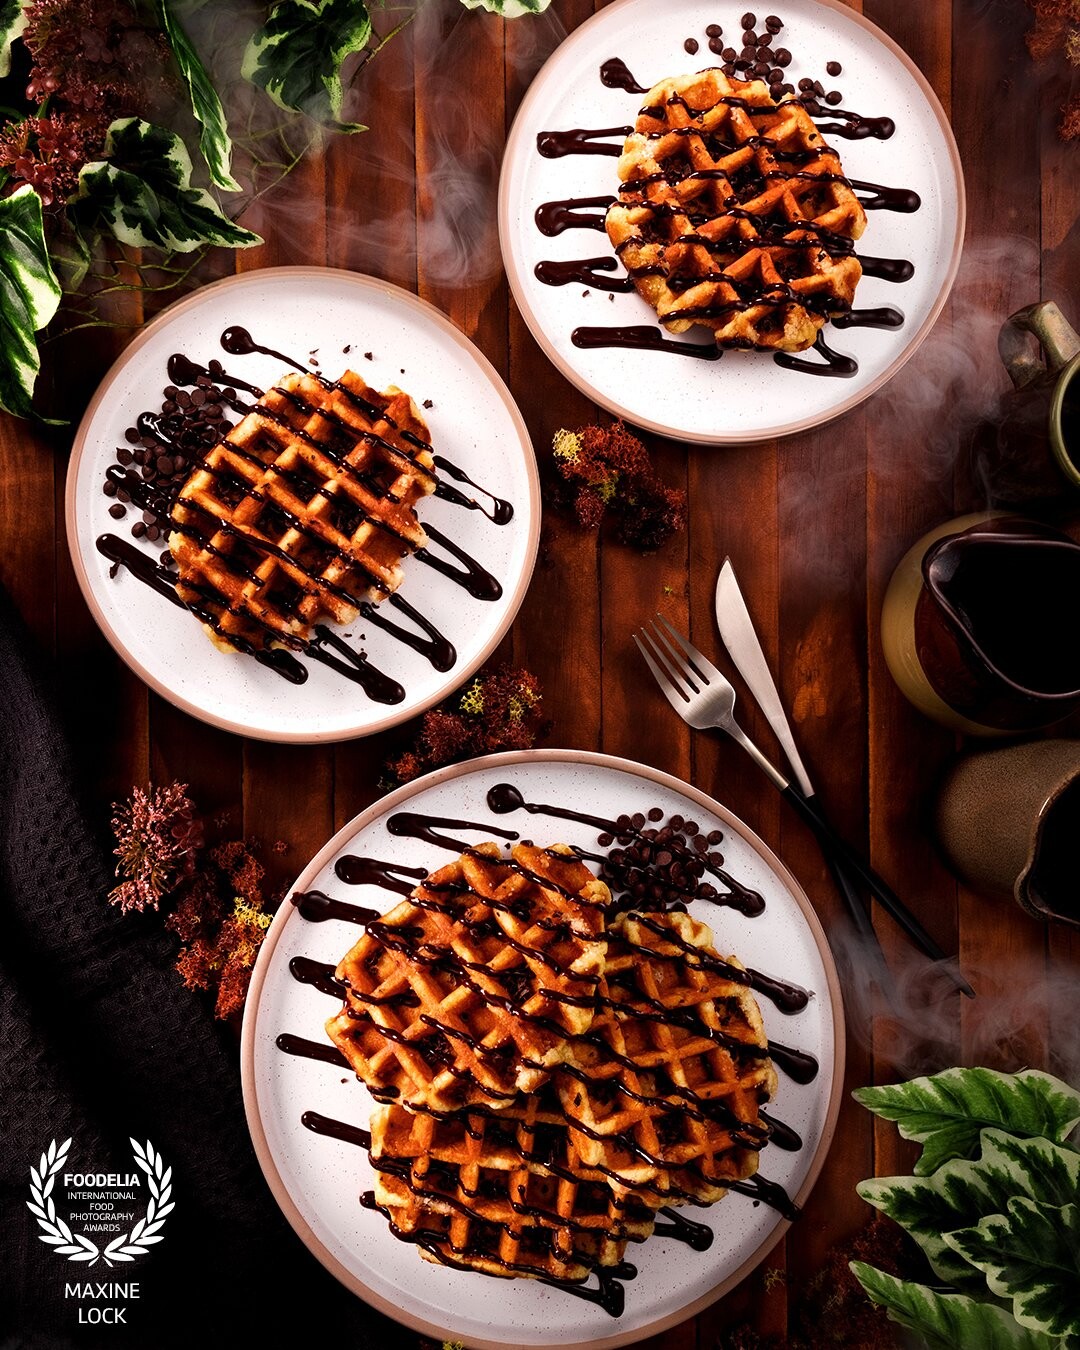 Plates of chocolate waffles photographed on a wooden table, using crockery as decorations but also using green leaves and smoke to create more of a scene.